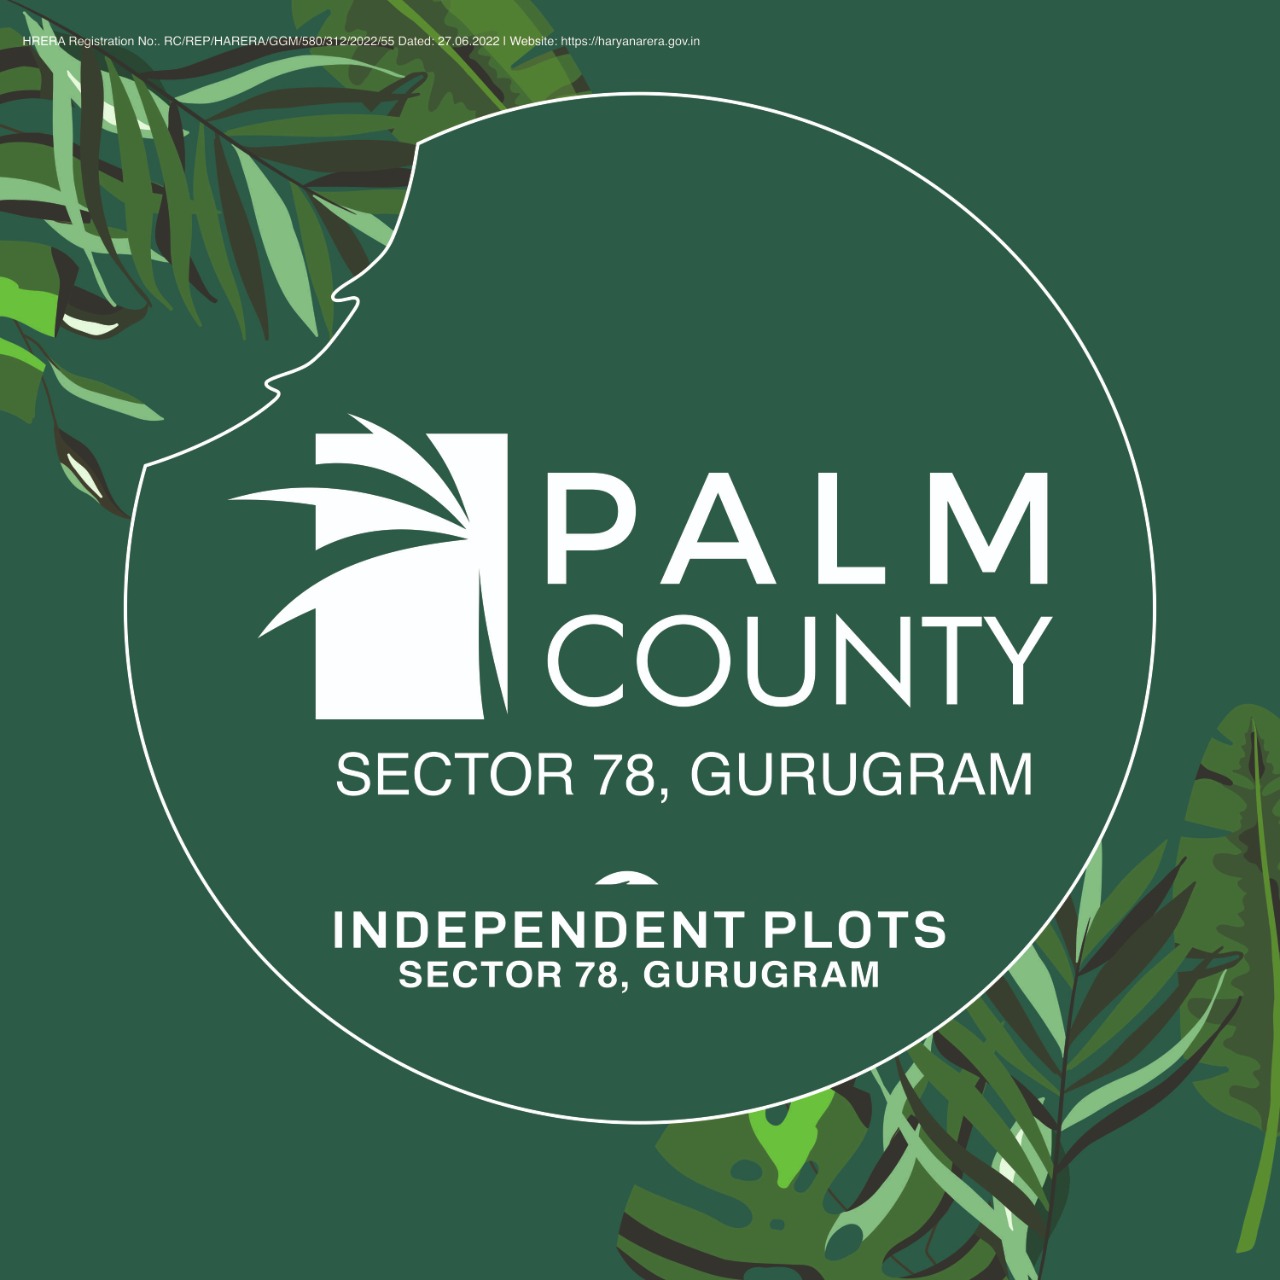 Independent plots at Pyramid Palm County in Sector 78, Gurgaon Update